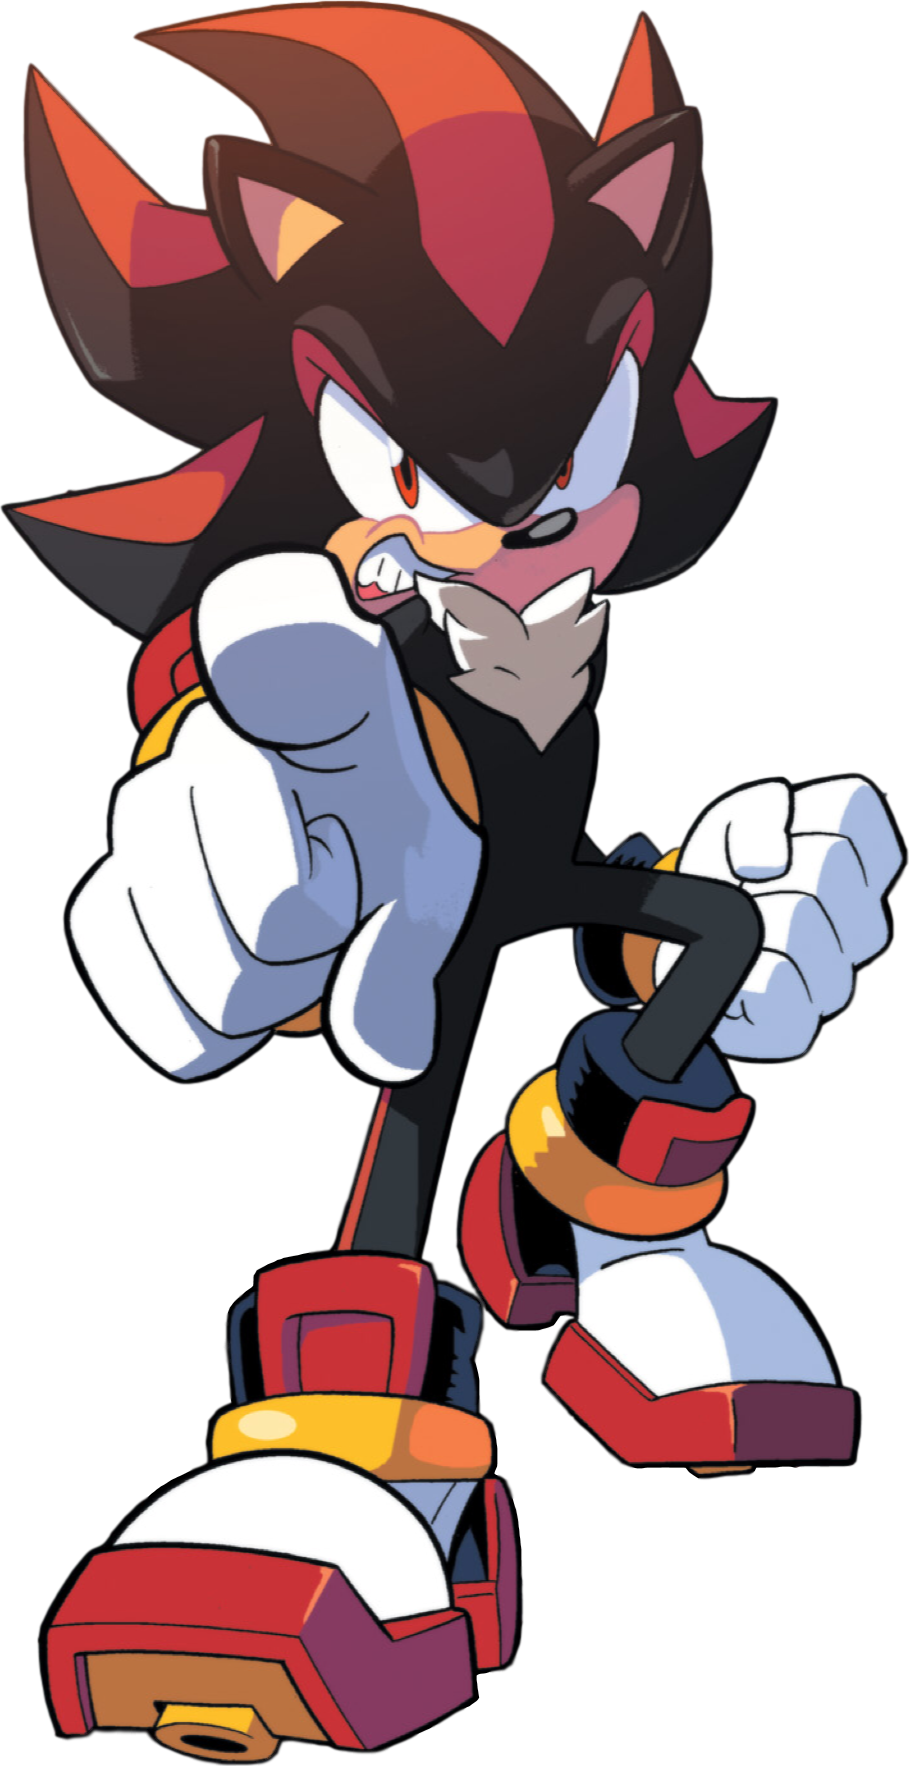 AndTails — Sonadow fans will enjoy the new IDW Sonic comic